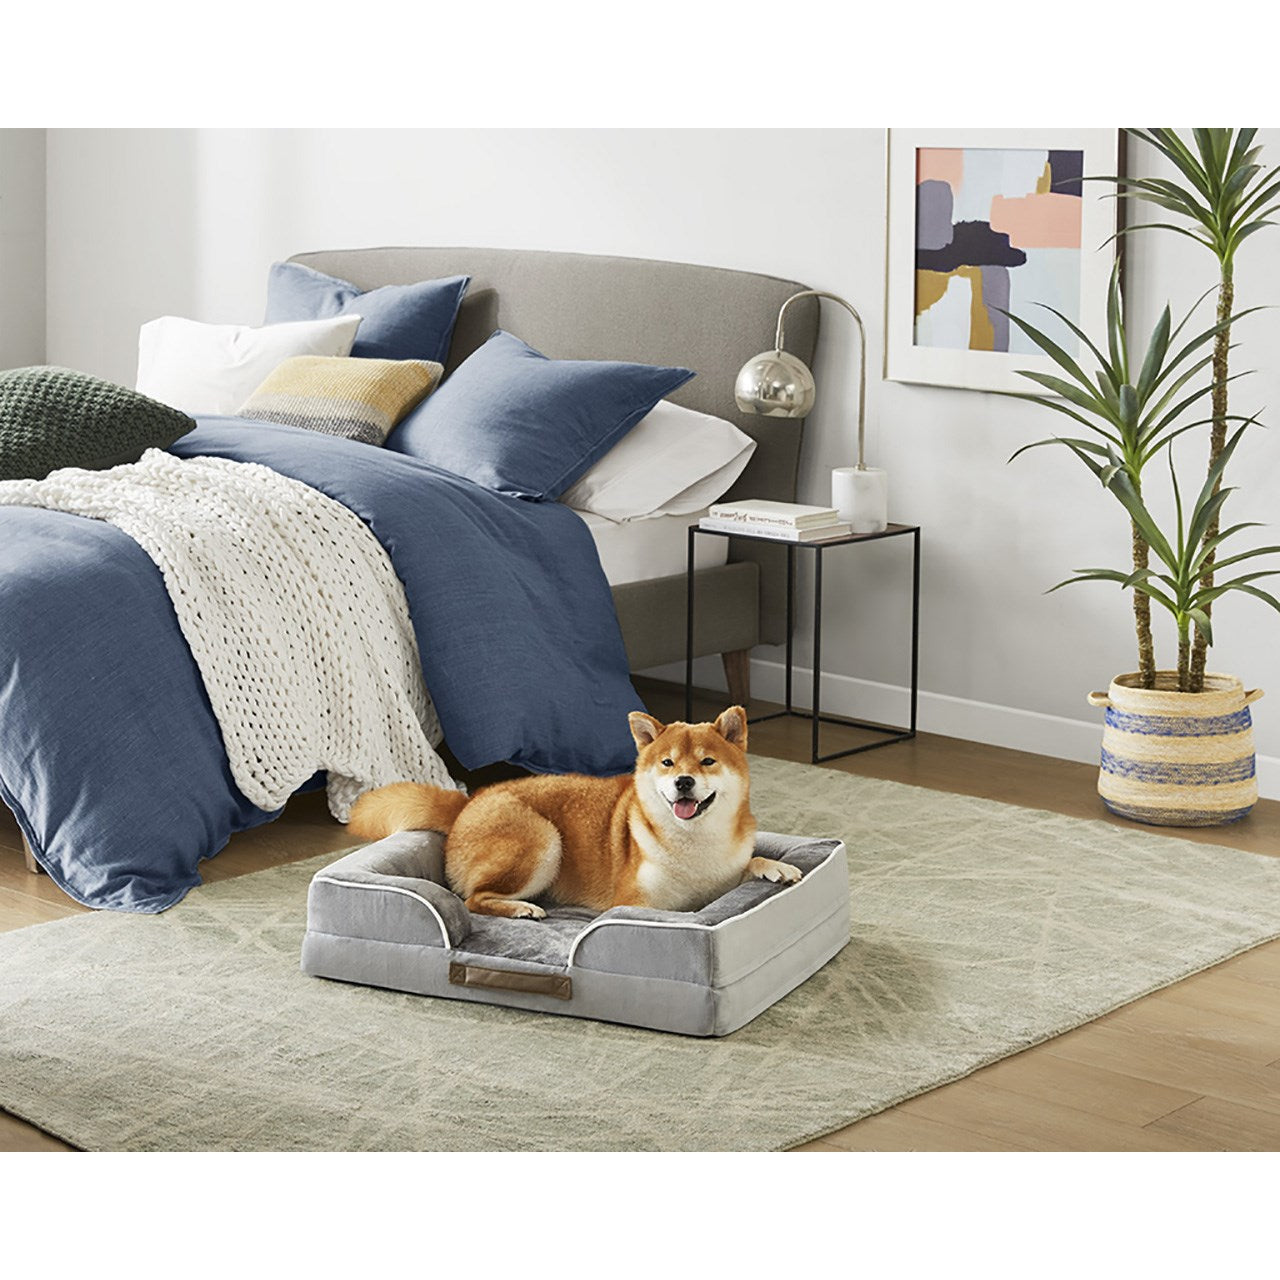 Orthopedic Dog Bed & Cat Bed | Dog Couch with Foam Bolster - Ally/Grey